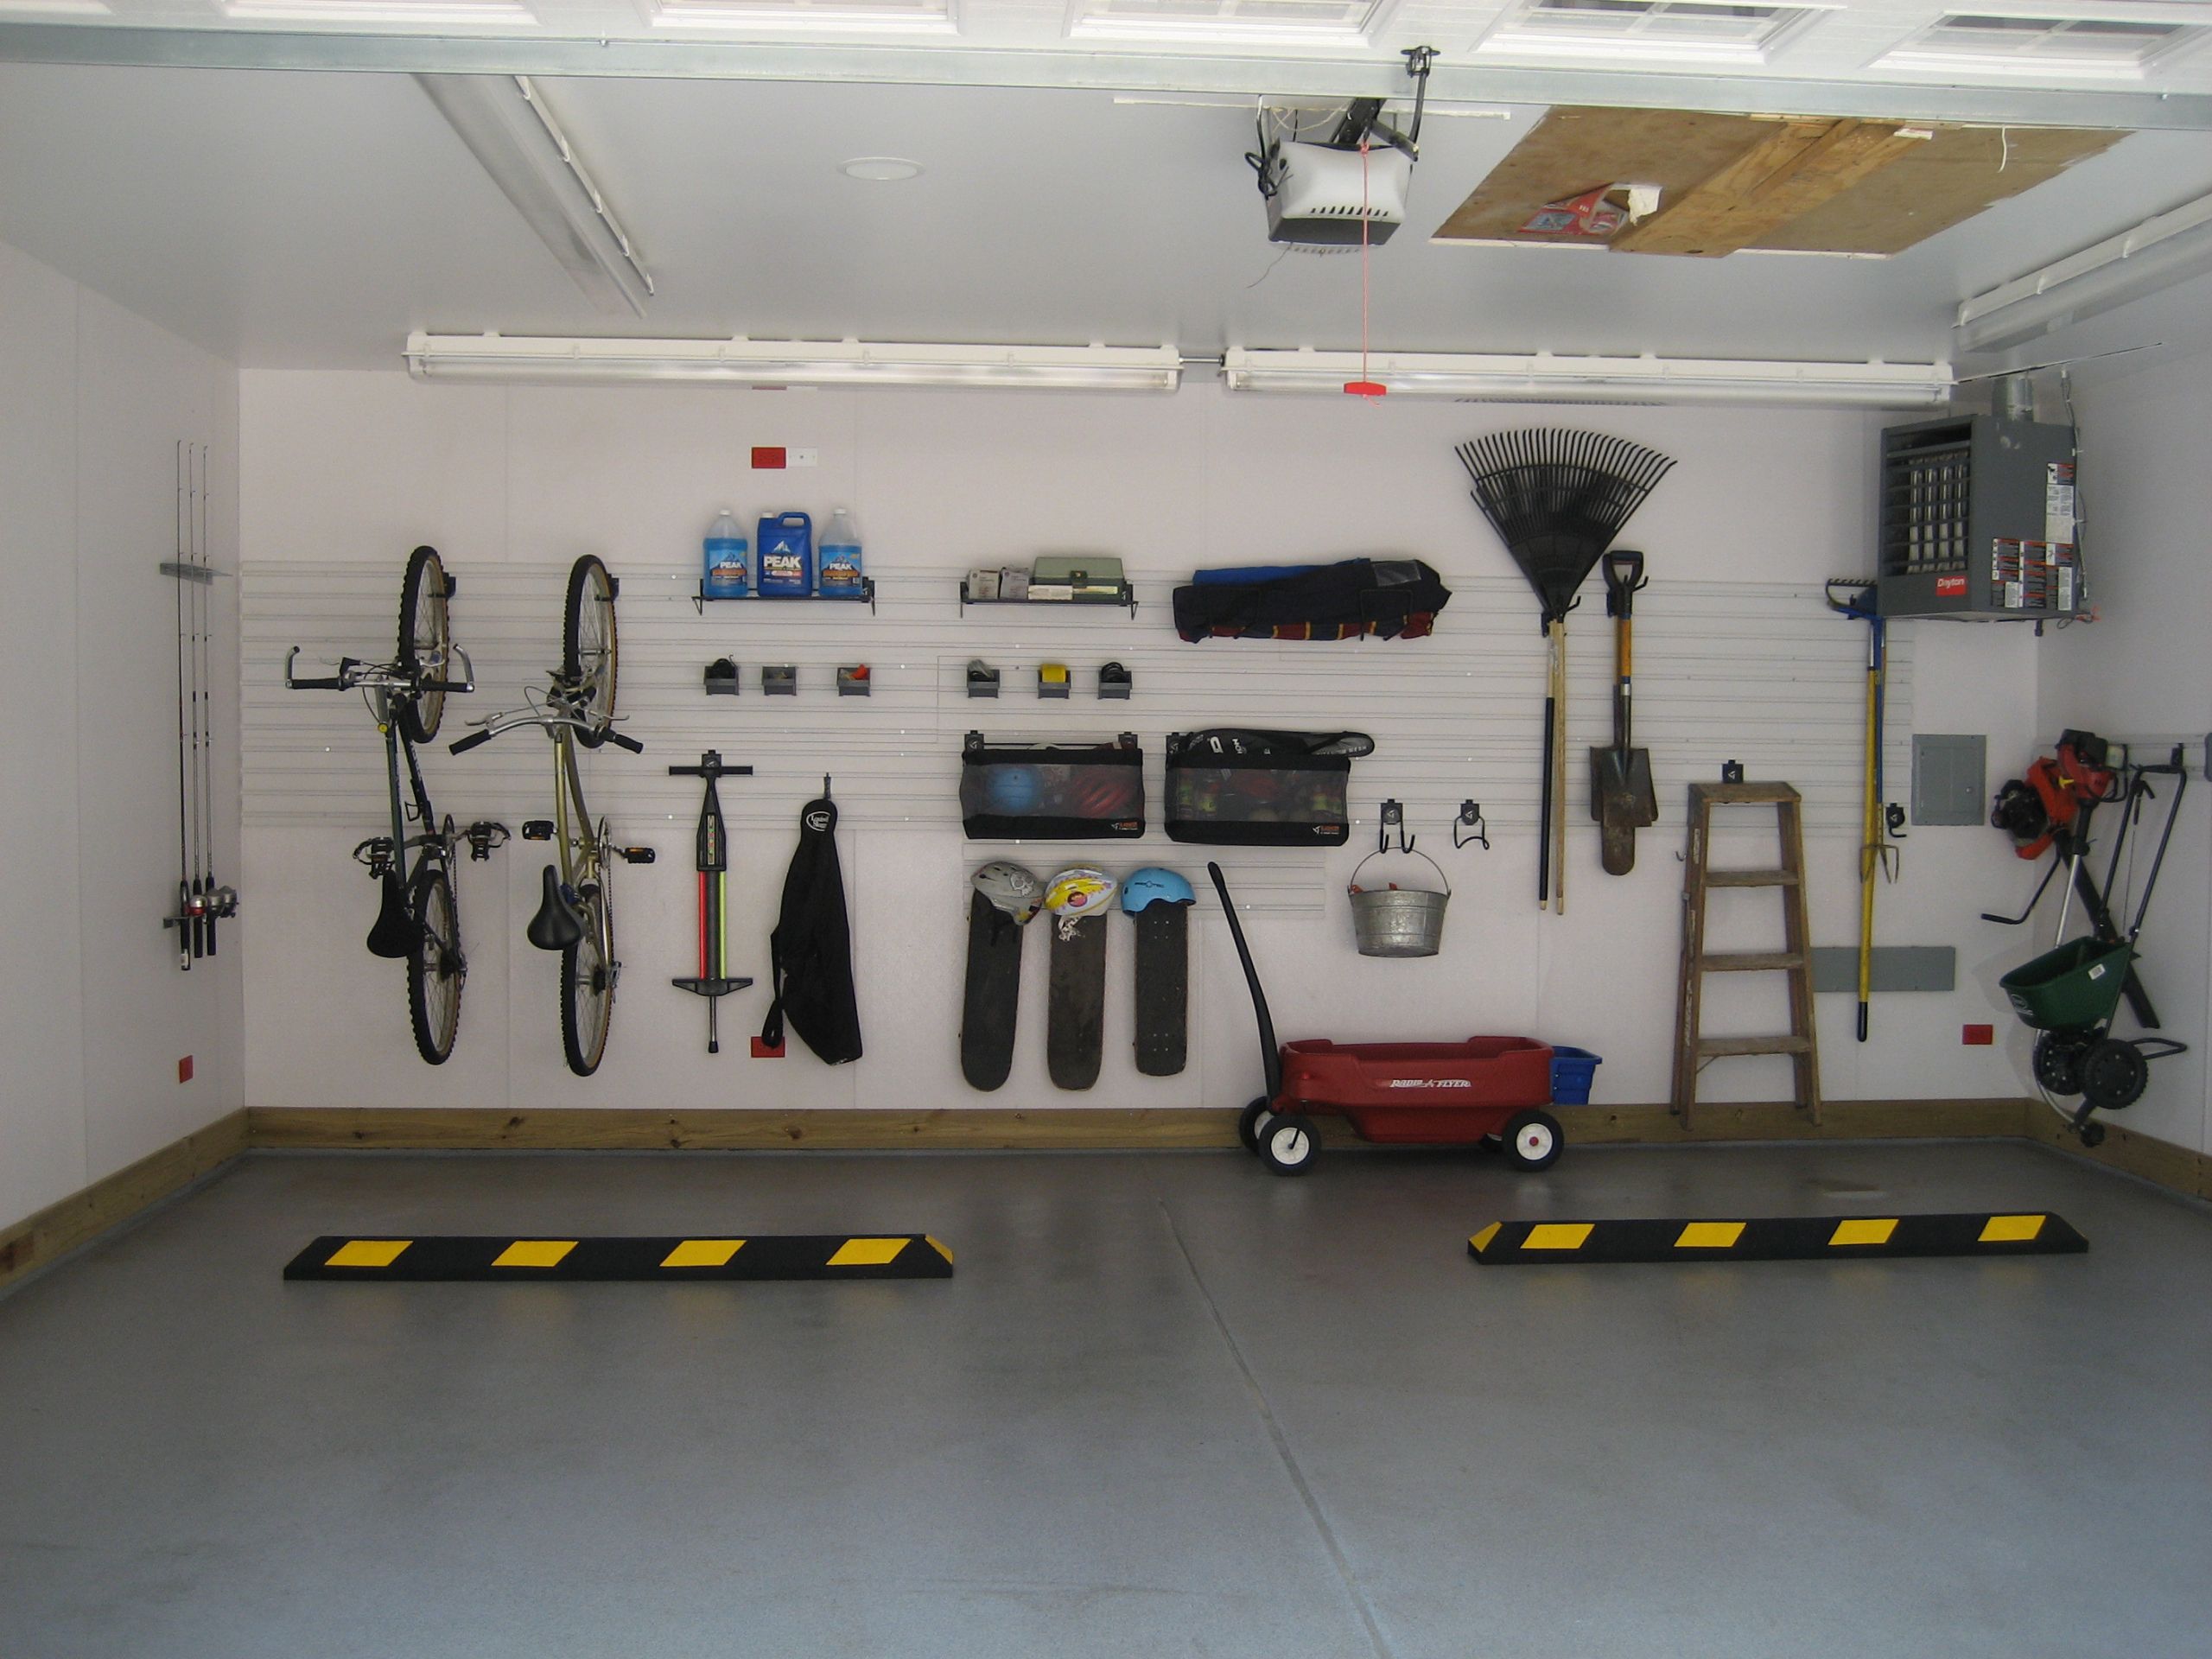 Garage Wall Organization Systems
 Friday Favorite Gladiator Garage Wall Systems Chaos to